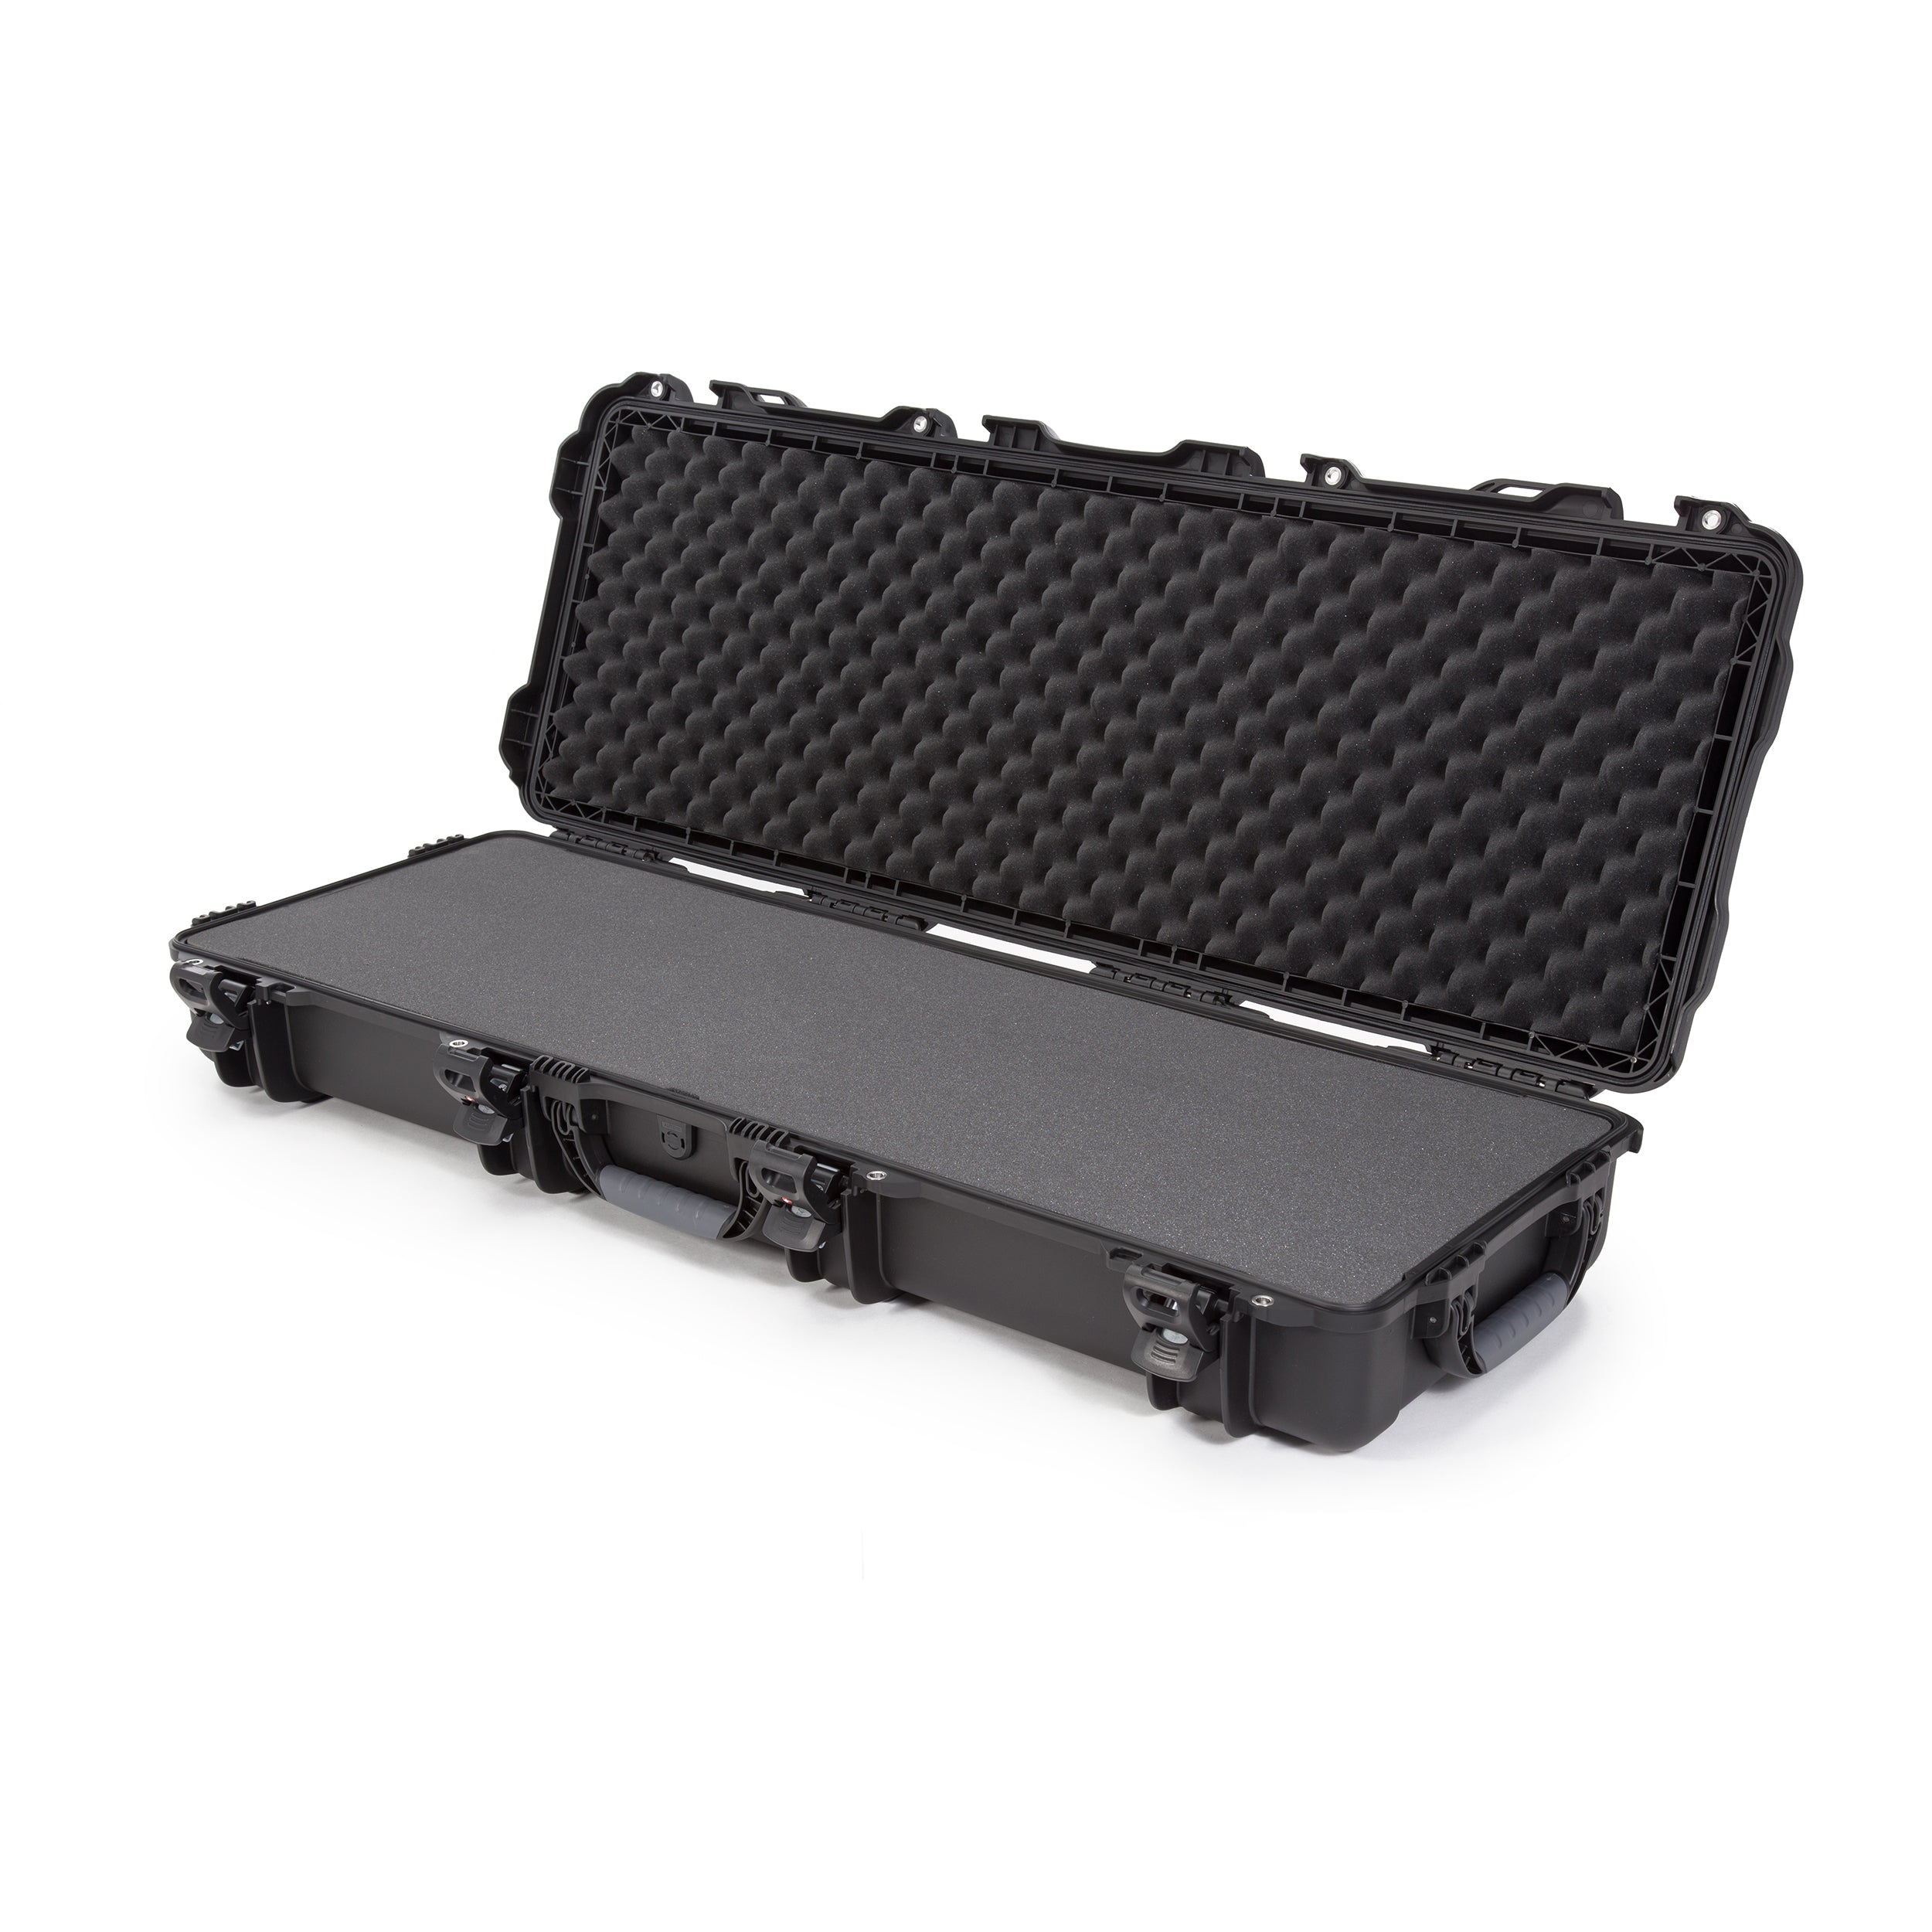 nanuk ronin mx waterproof hard case with wheels and custom foam insert for ronin mx gimbal stabilizer systems yellow